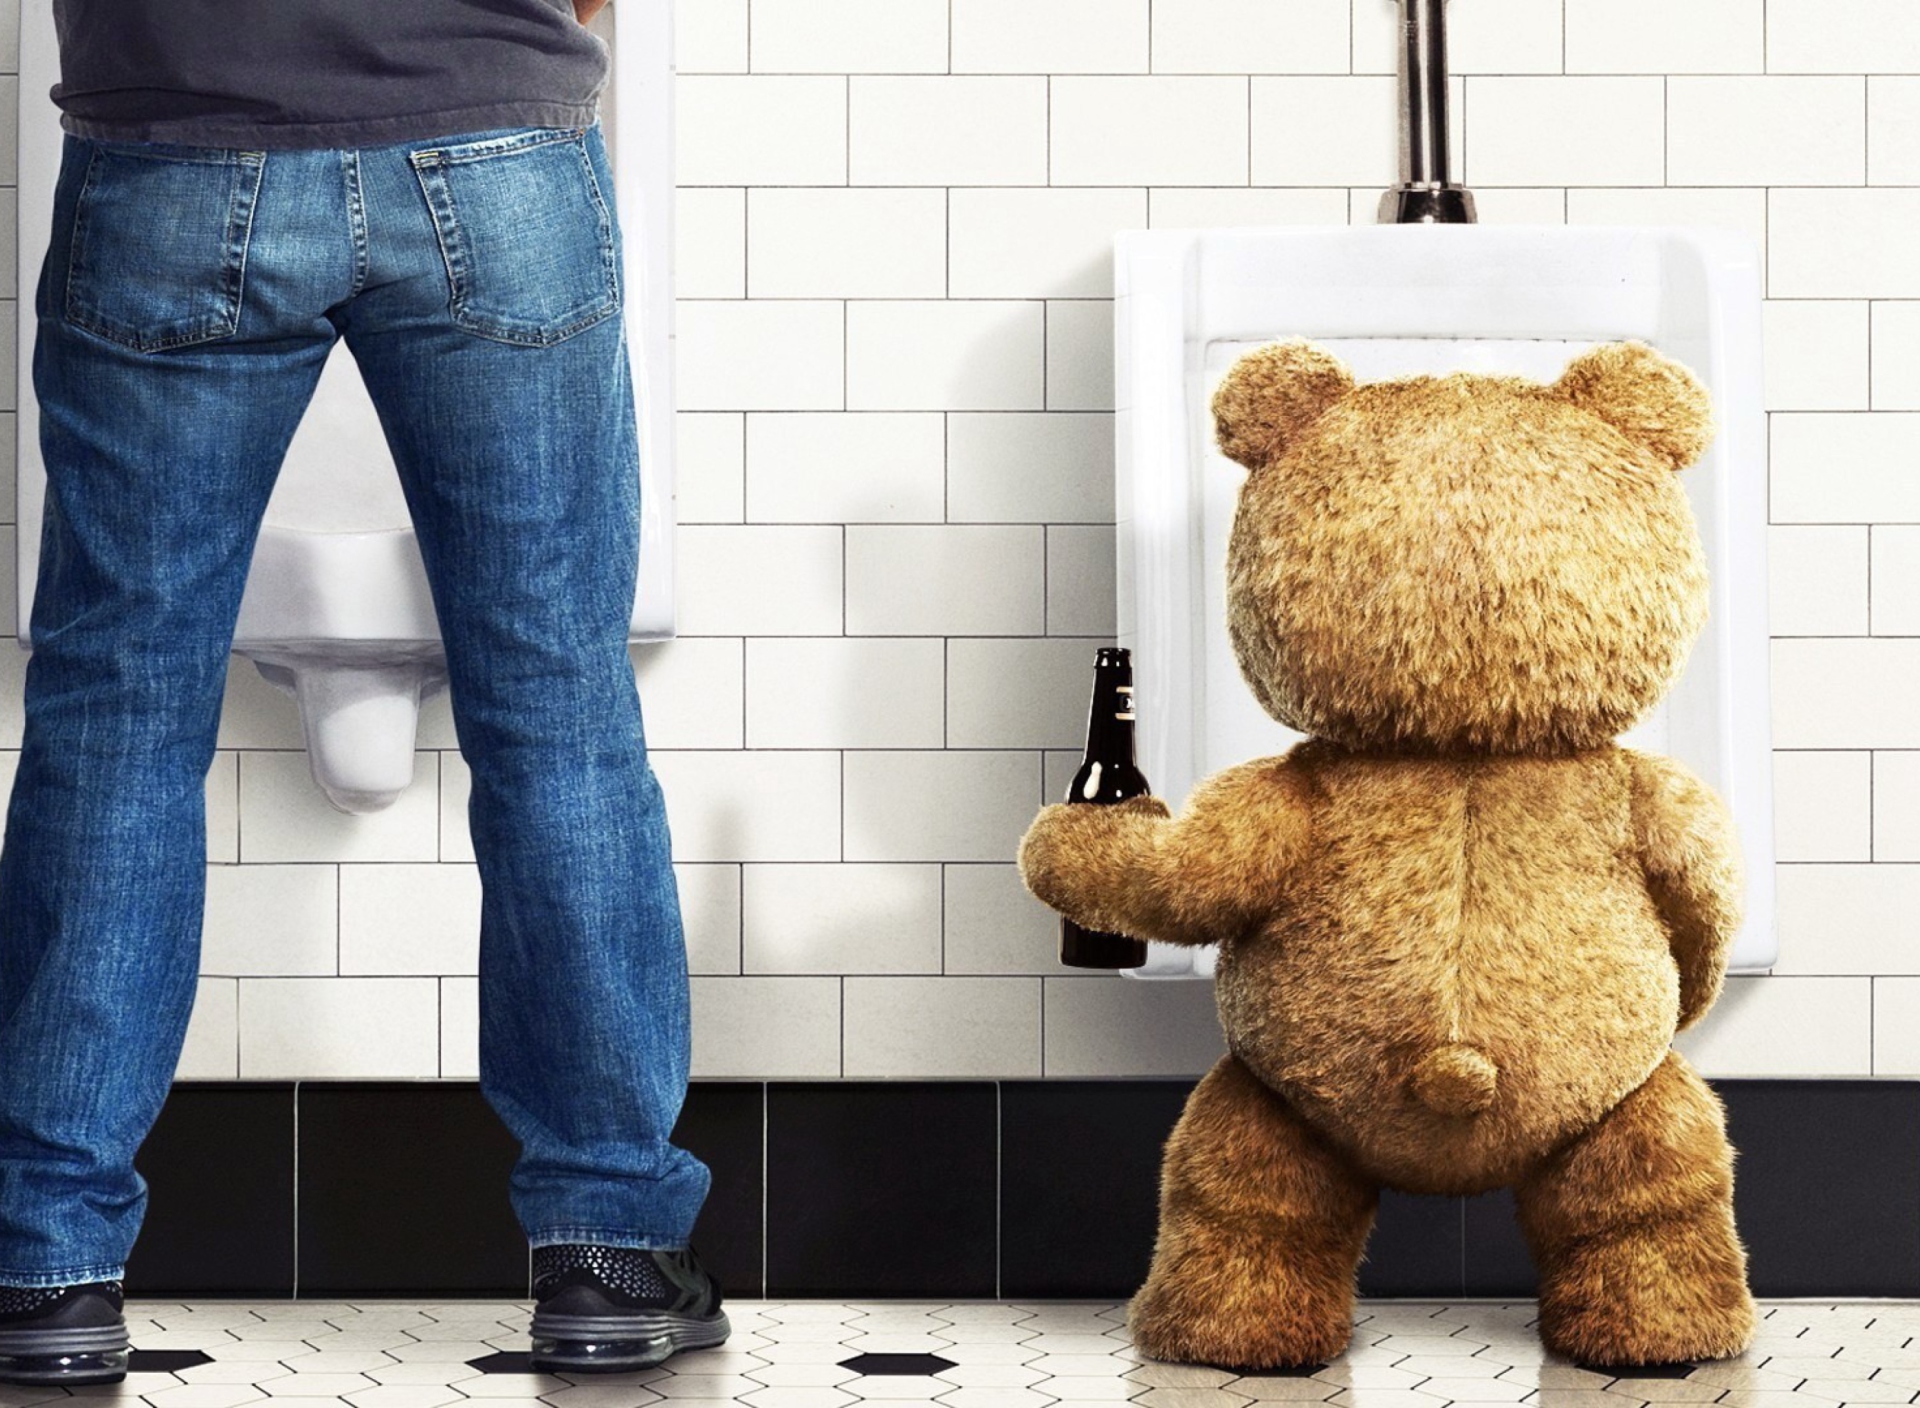 Ted Poster wallpaper 1920x1408